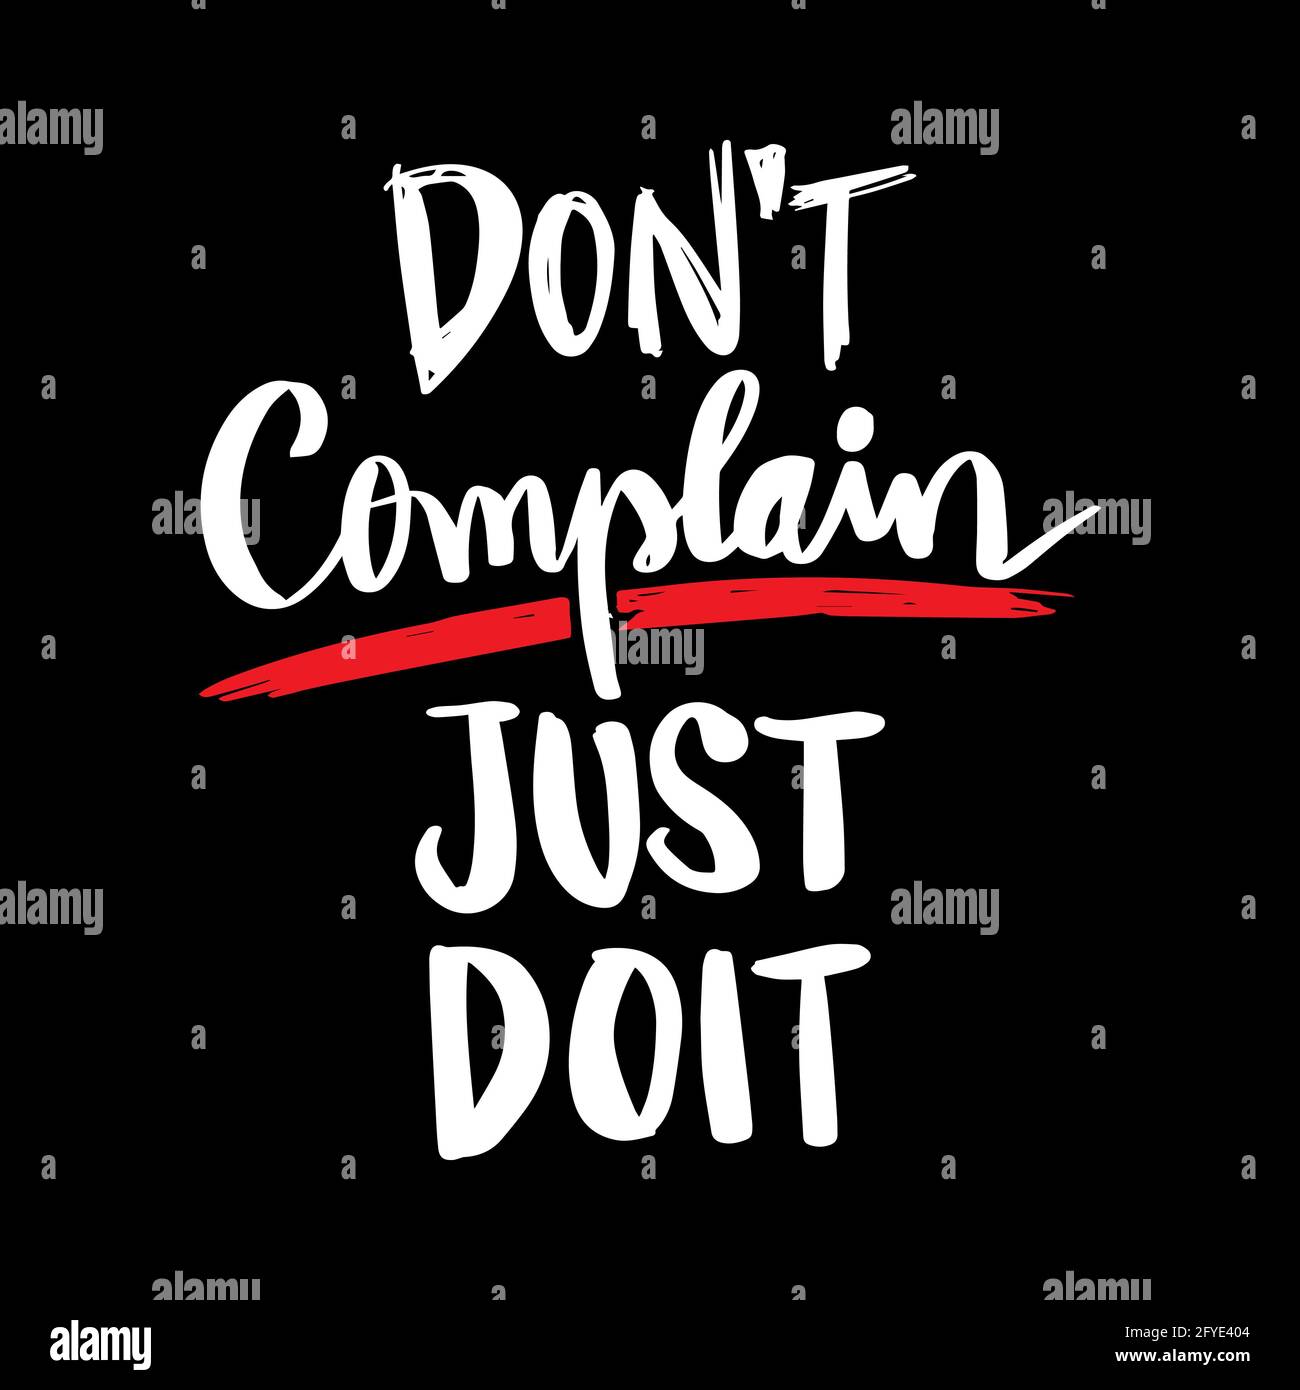 Don't complain just do it.   Motivational quotes. Stock Photo